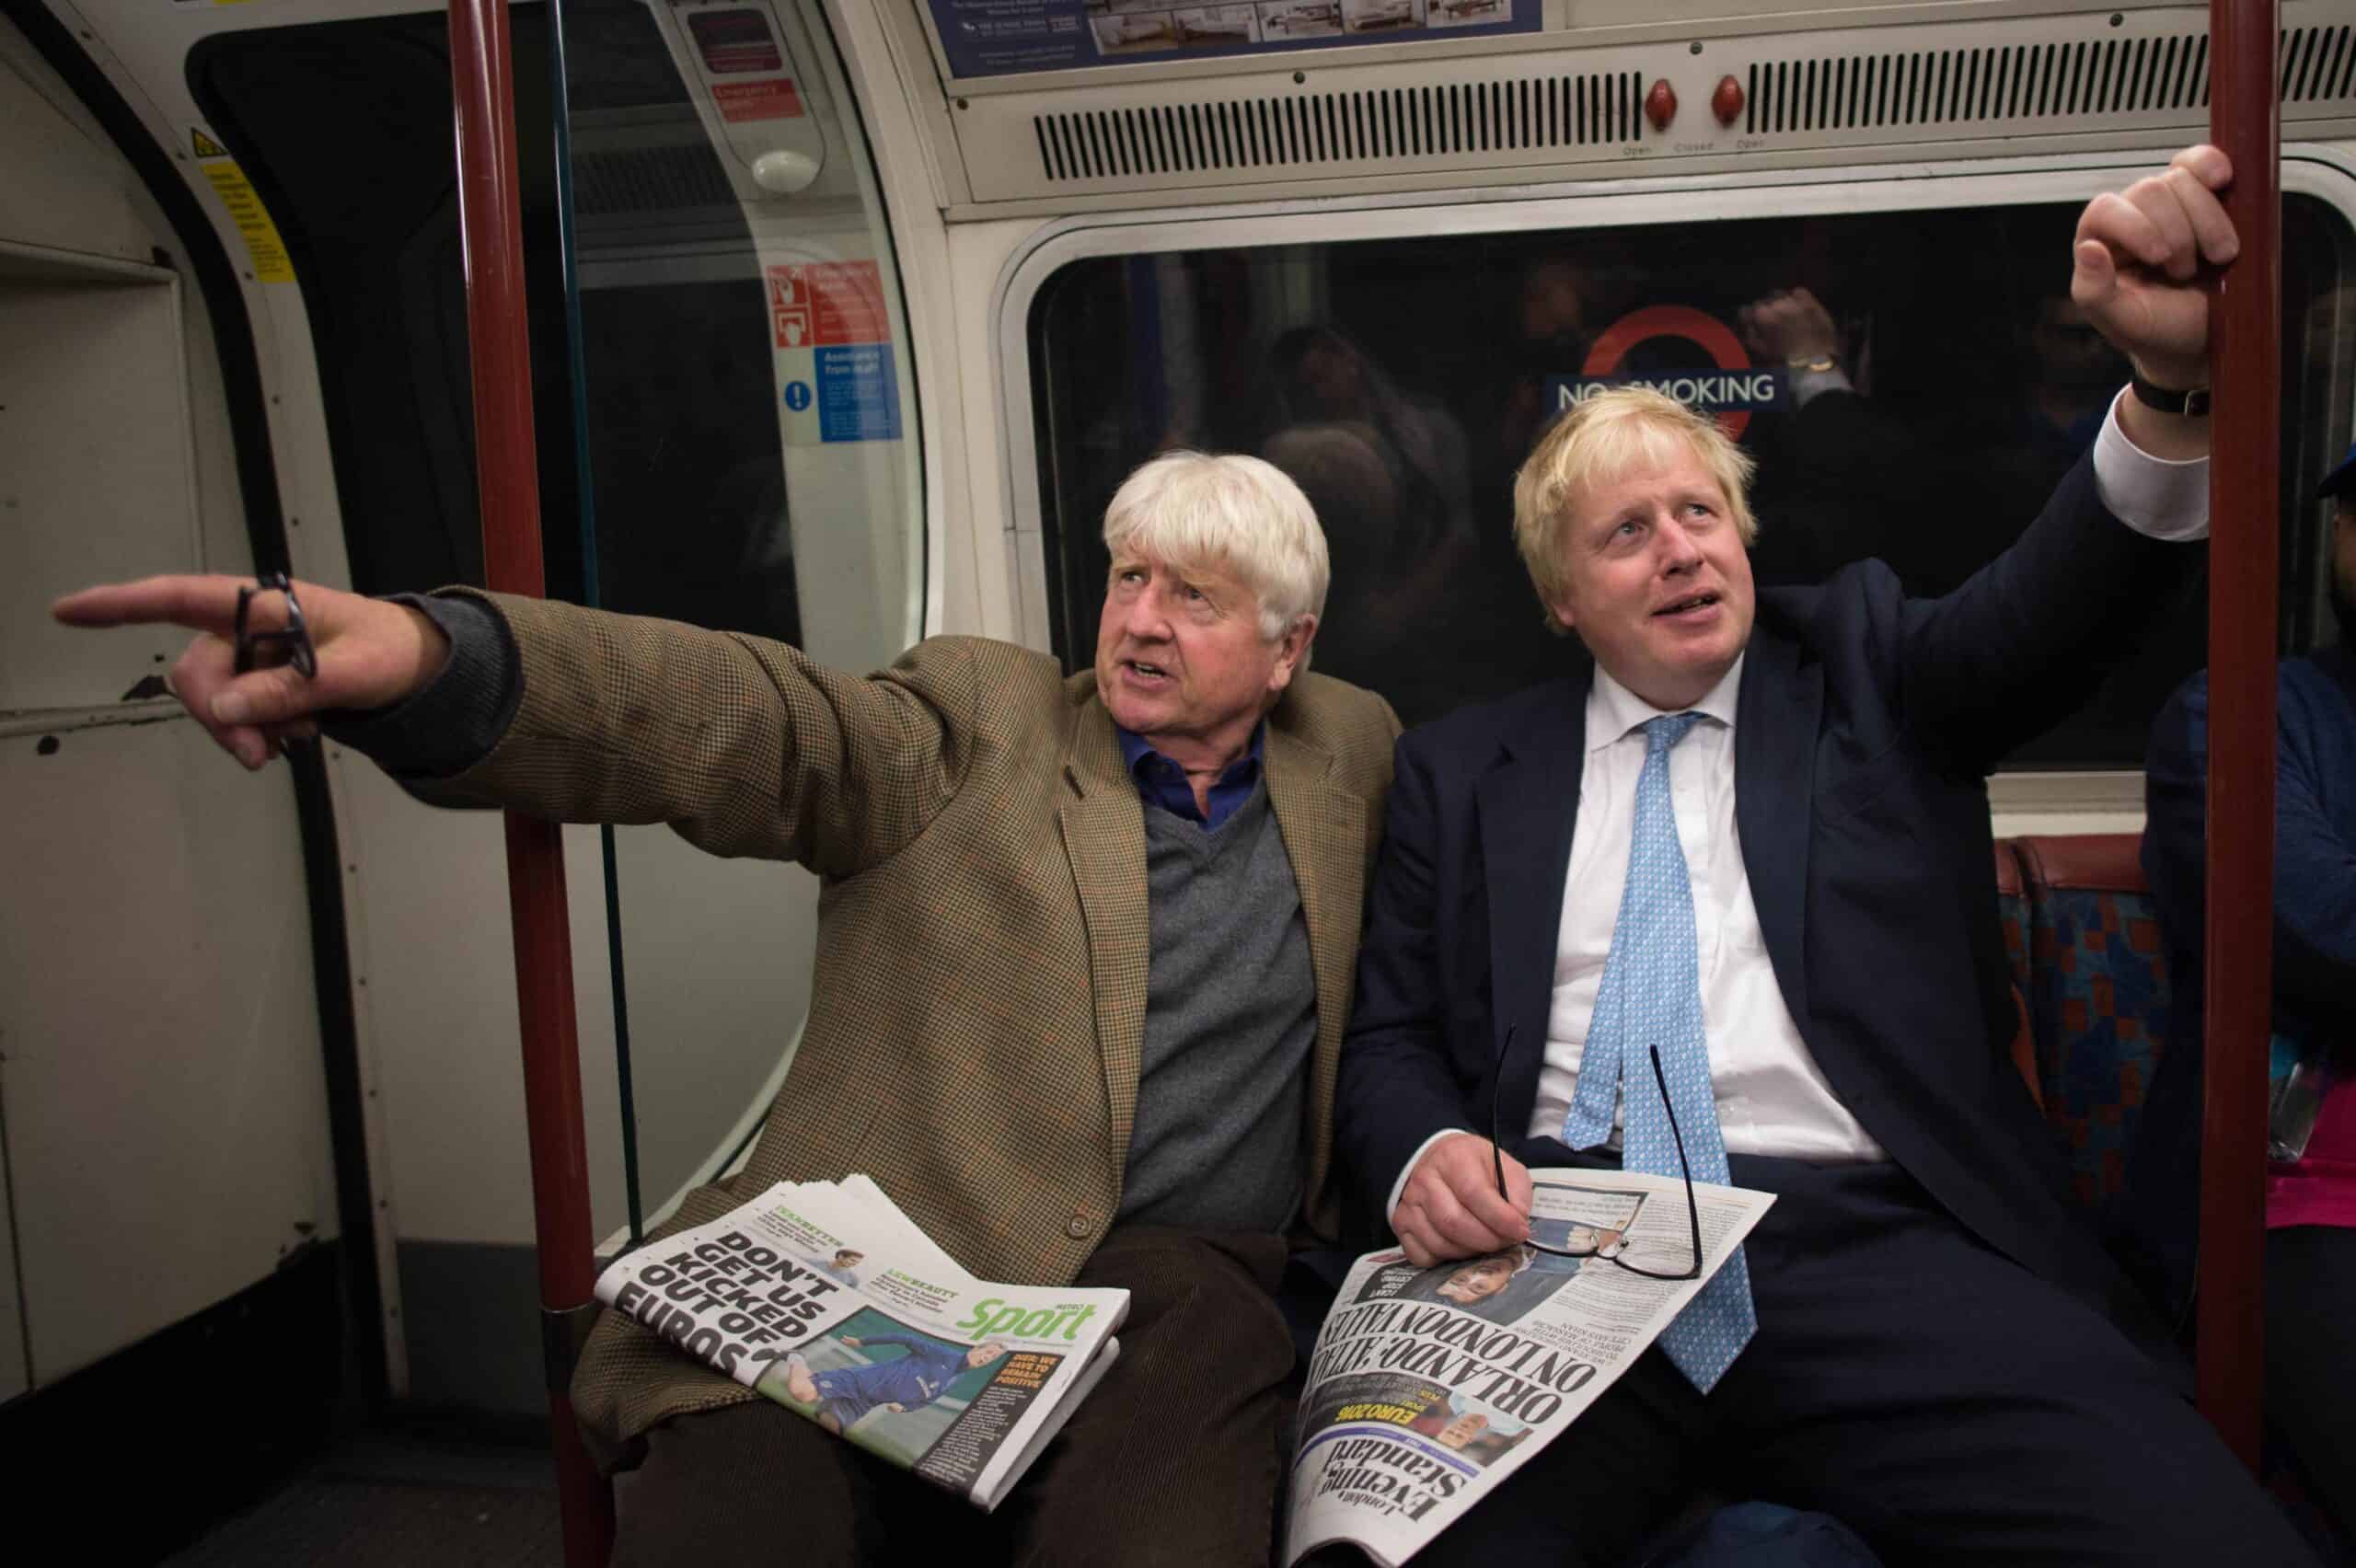 A reminder that Boris Johnson’s 80-year-old dad was double jabbed before everyone else